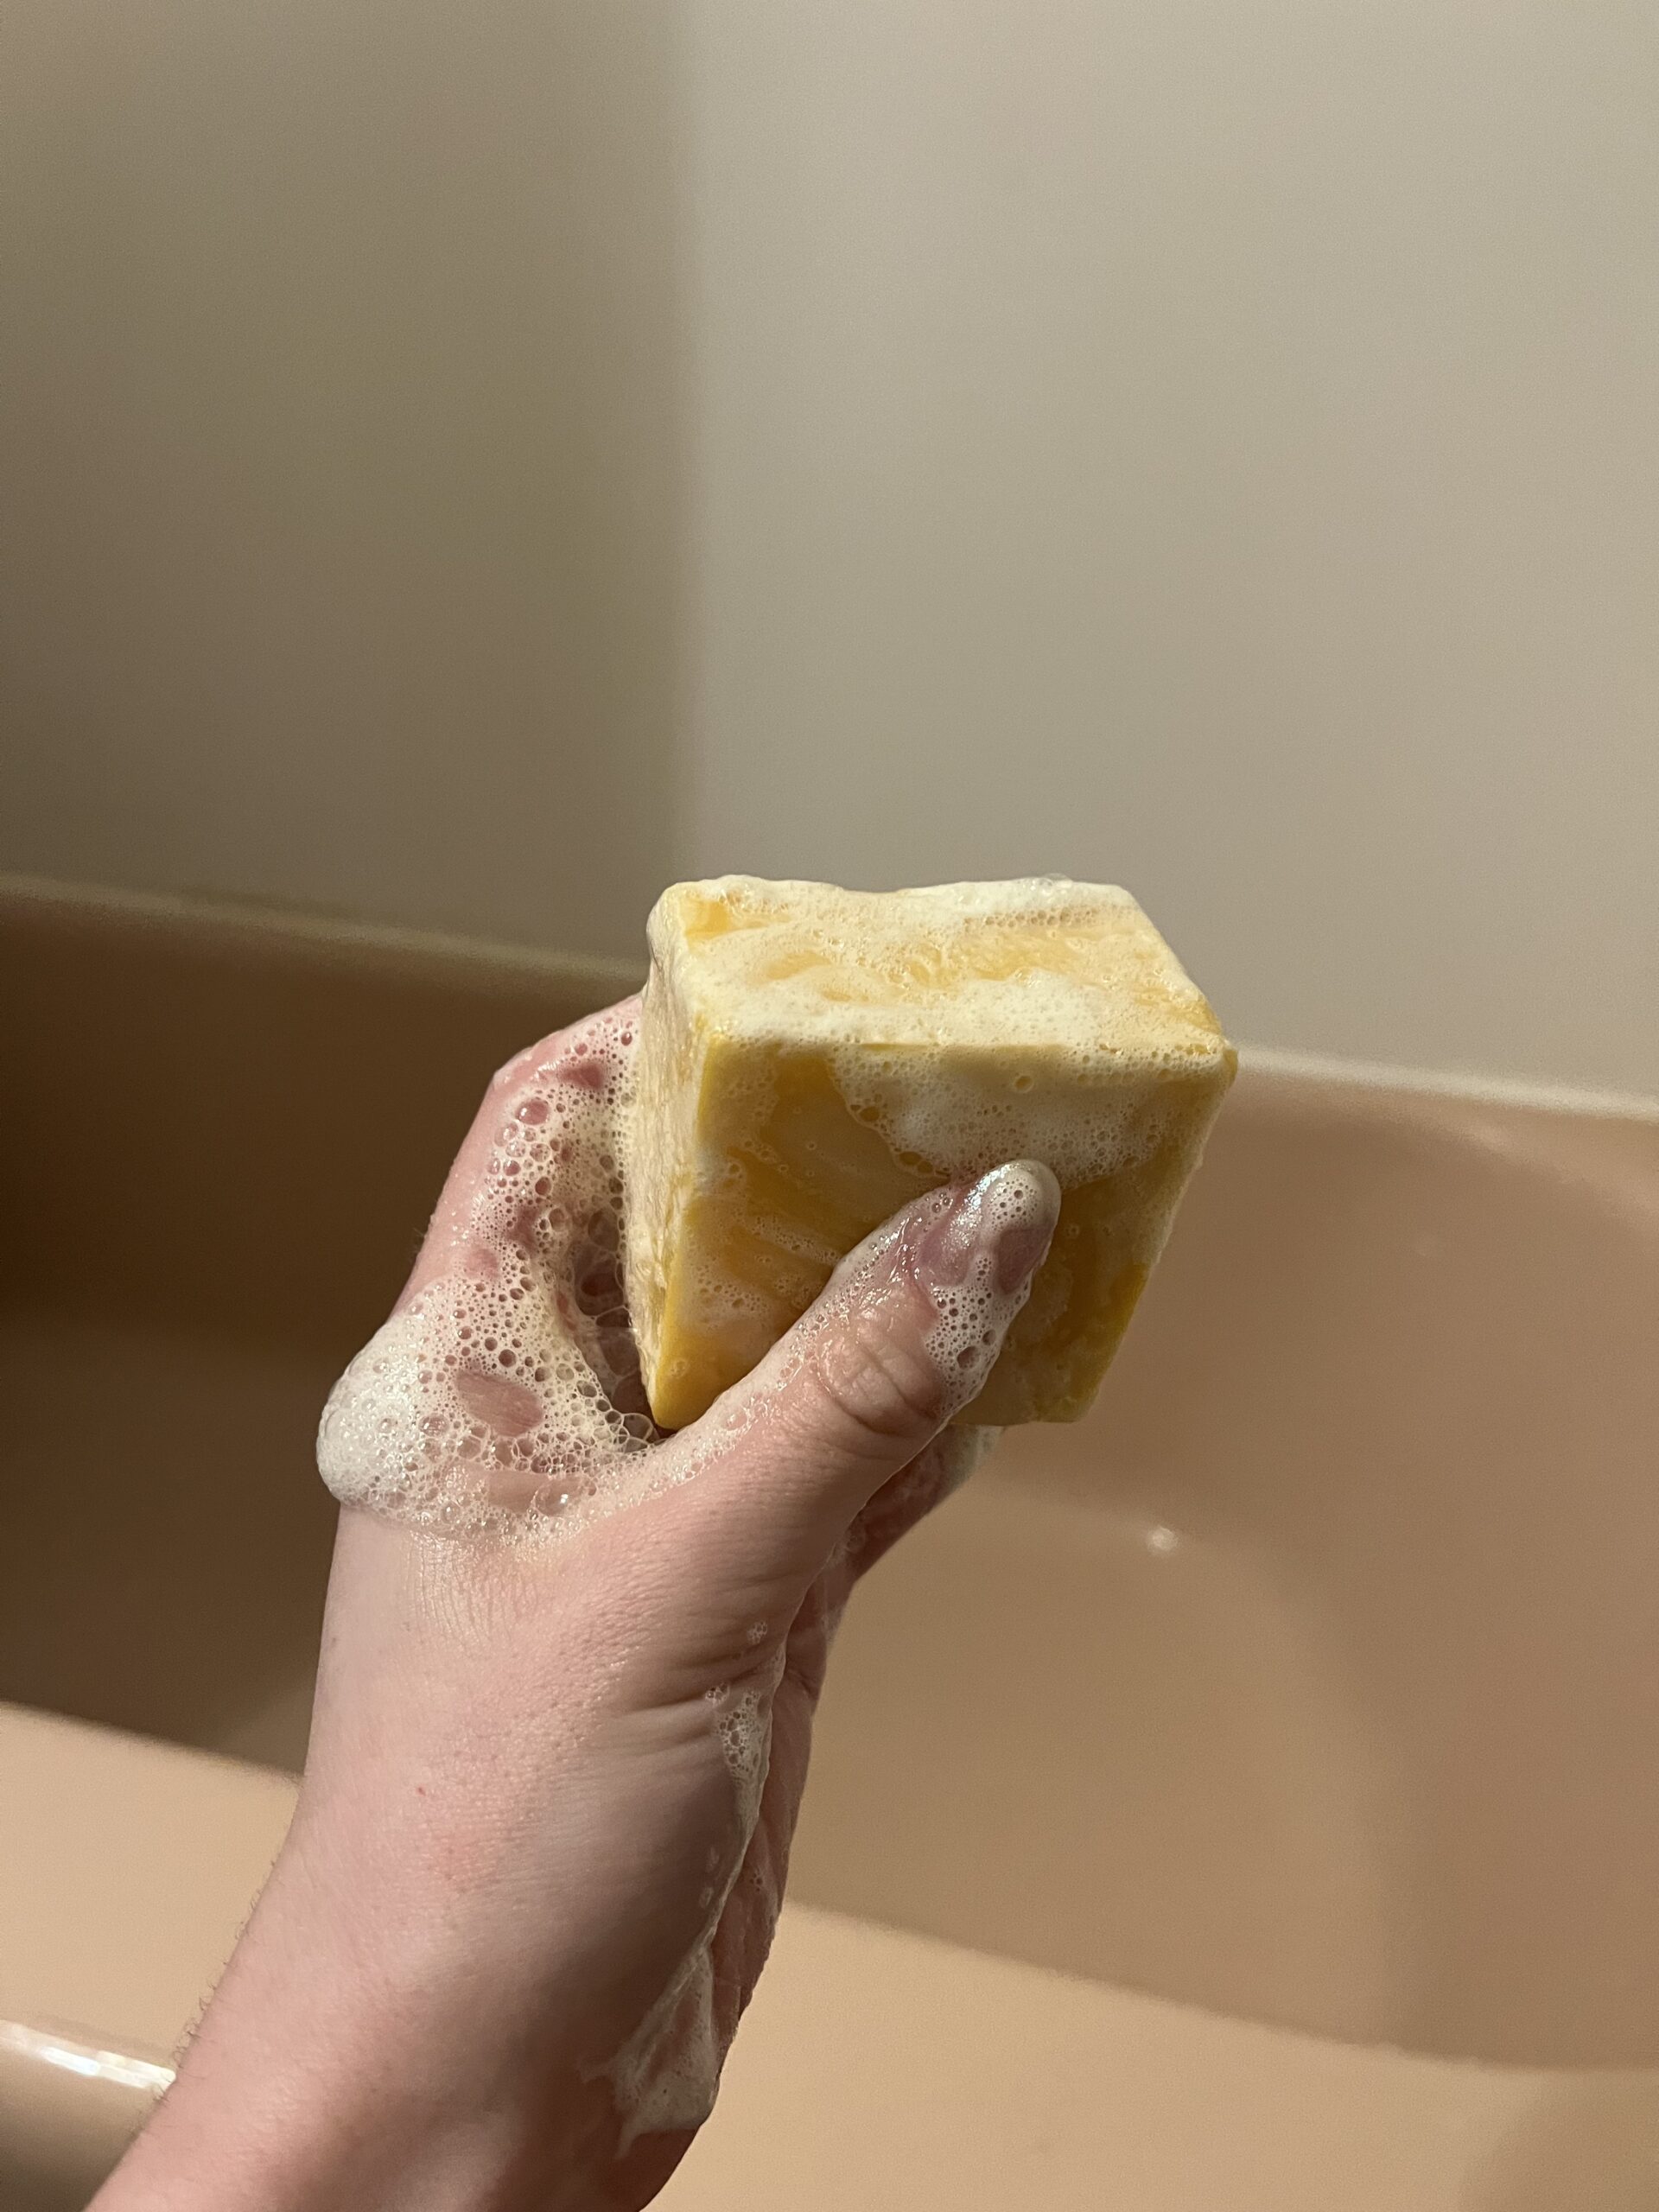 A person holding a sudsy yellow sponge in a bathtub.